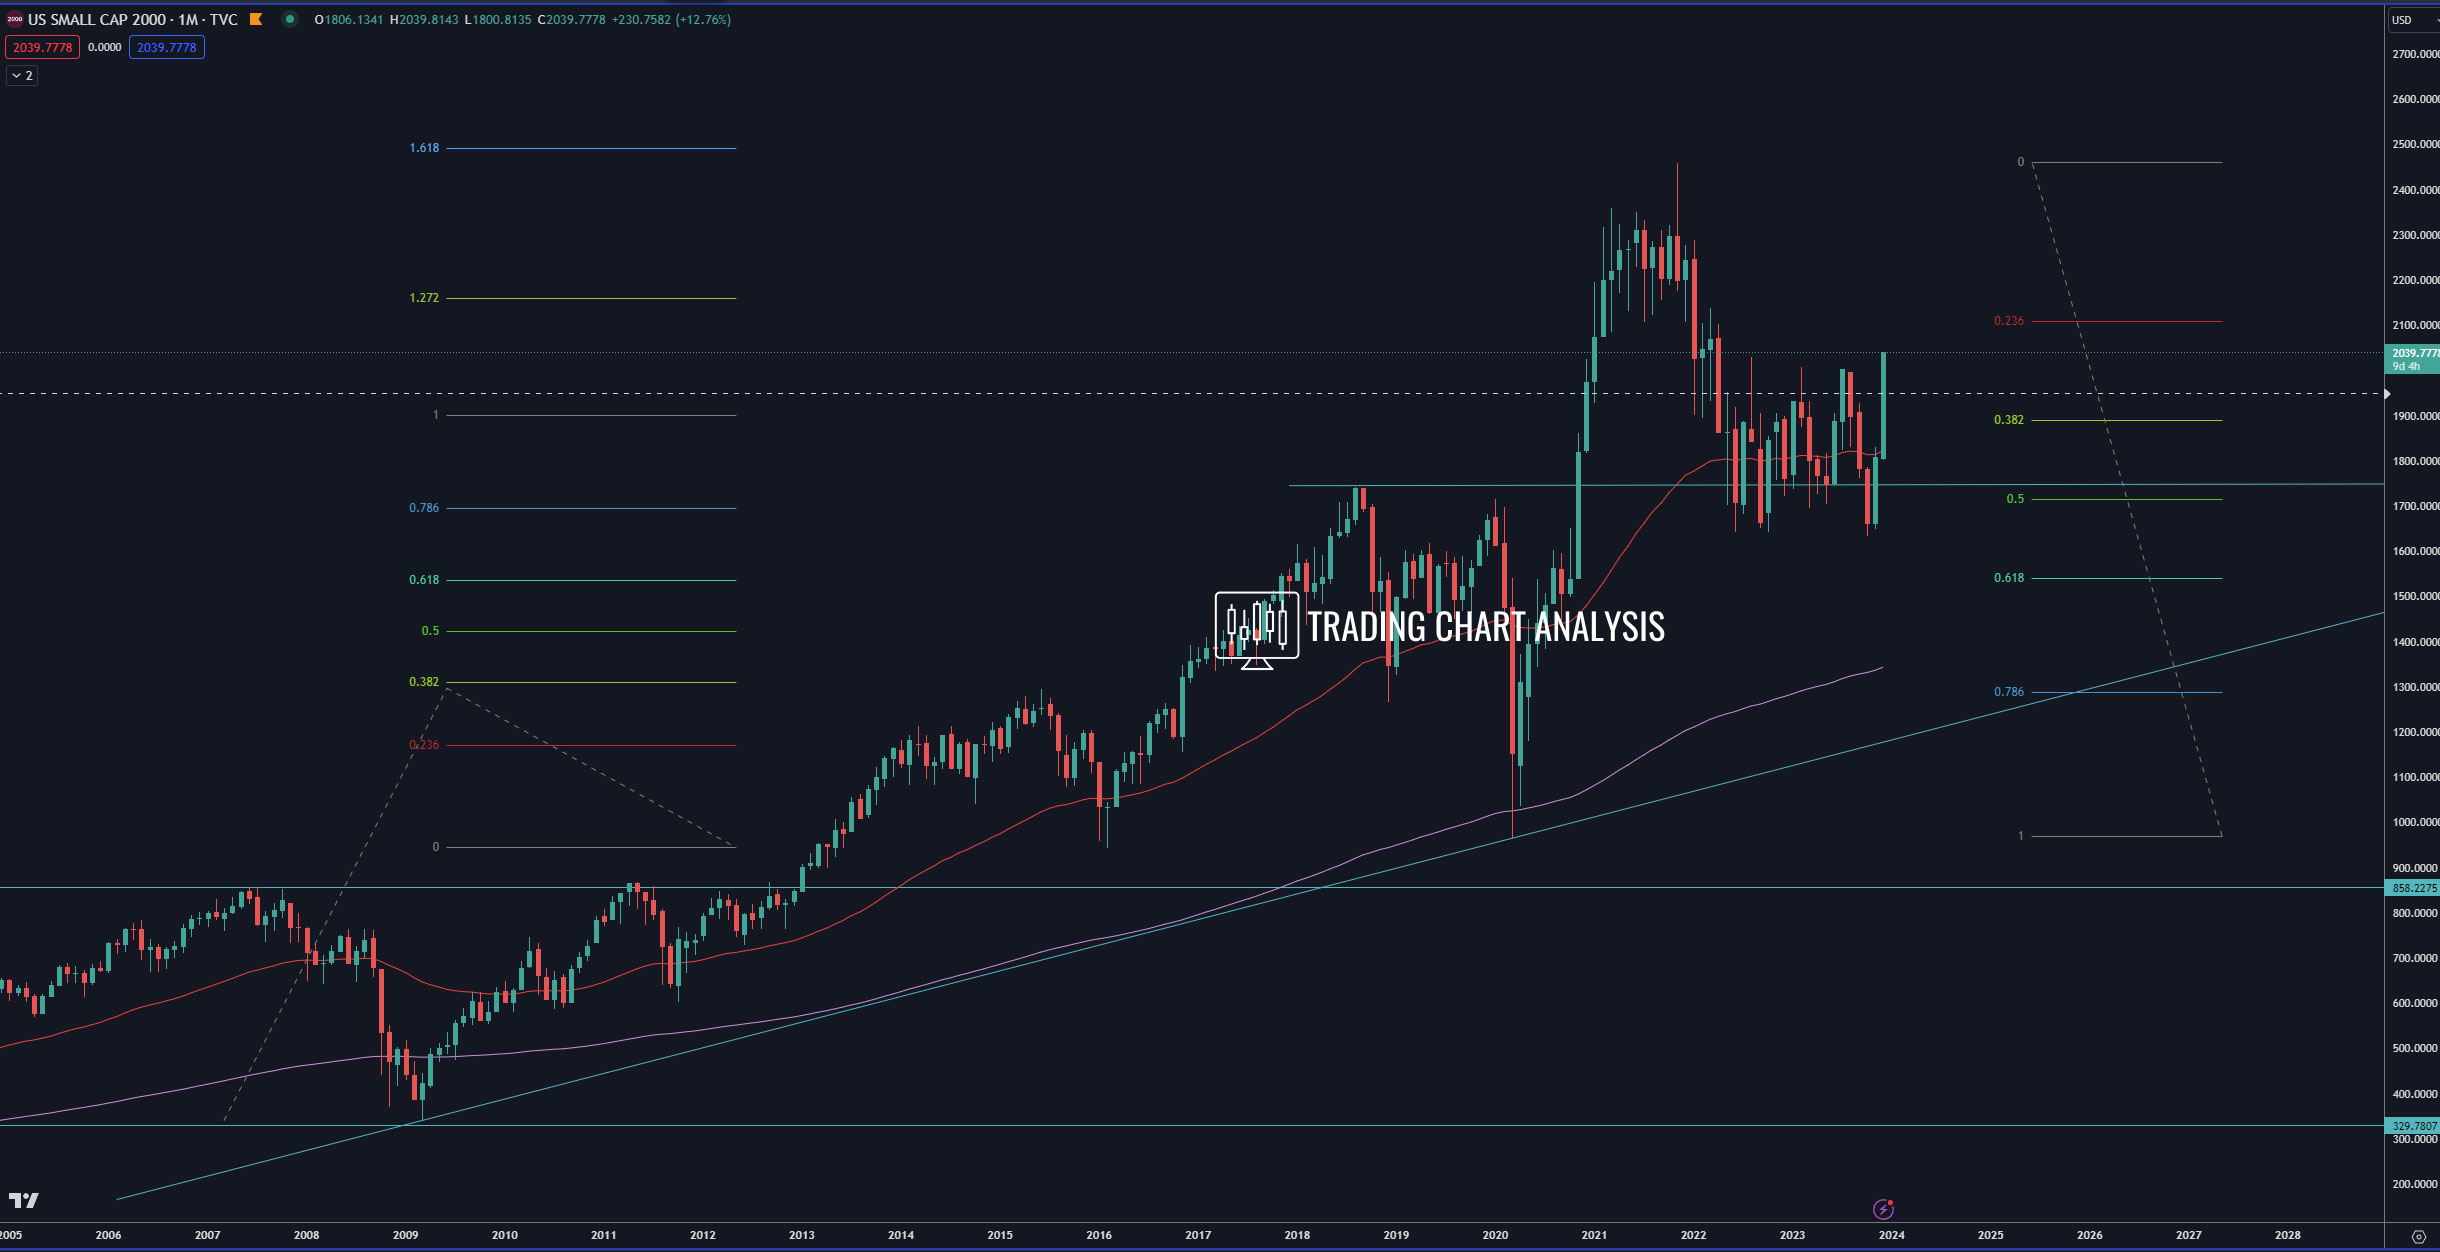 Russell 2000 monthly chart analysis